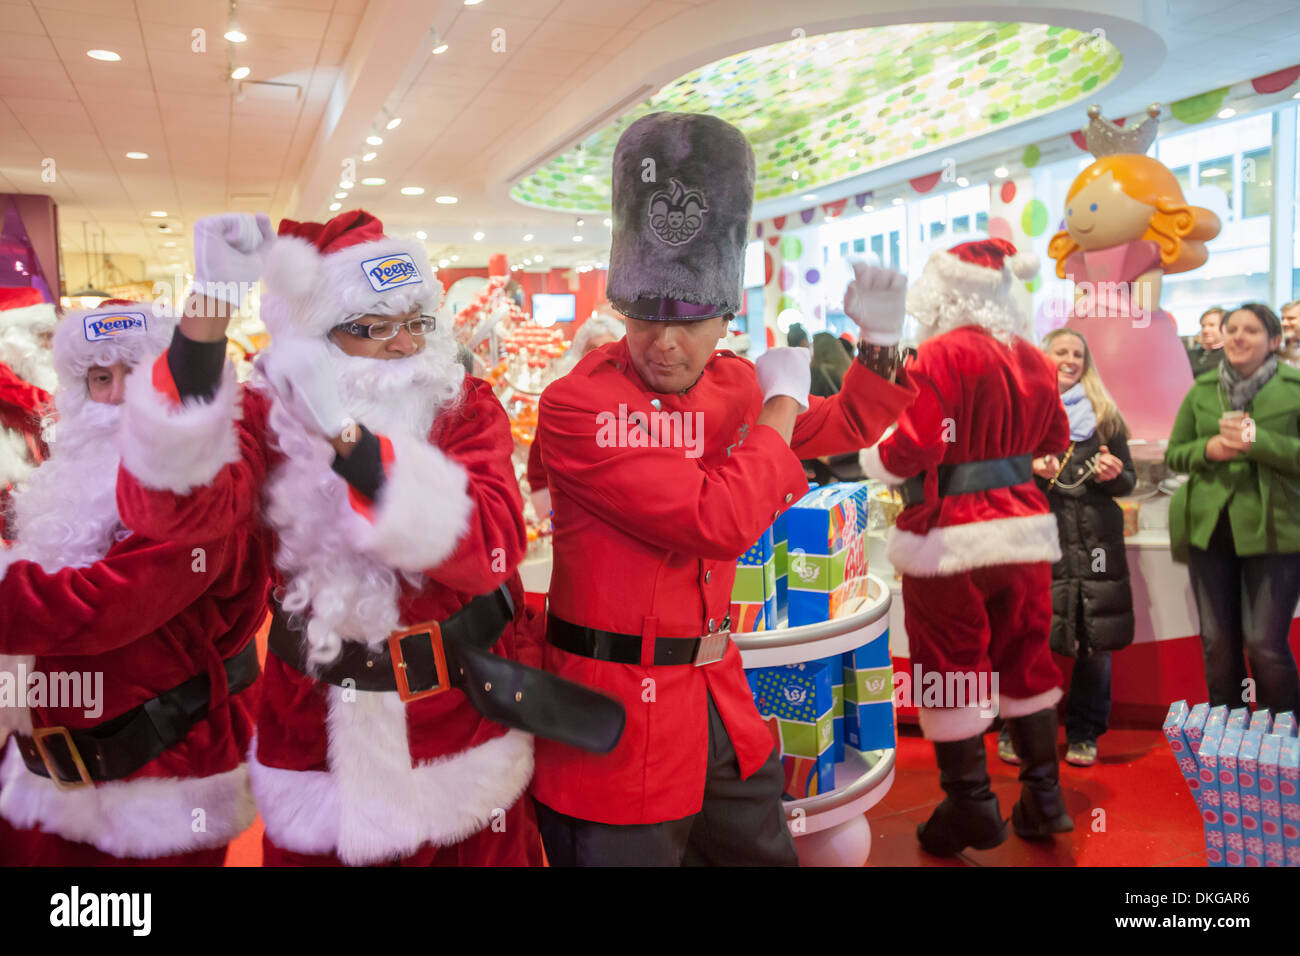 Fao schwarz new york christmas hi-res stock photography and images - Alamy